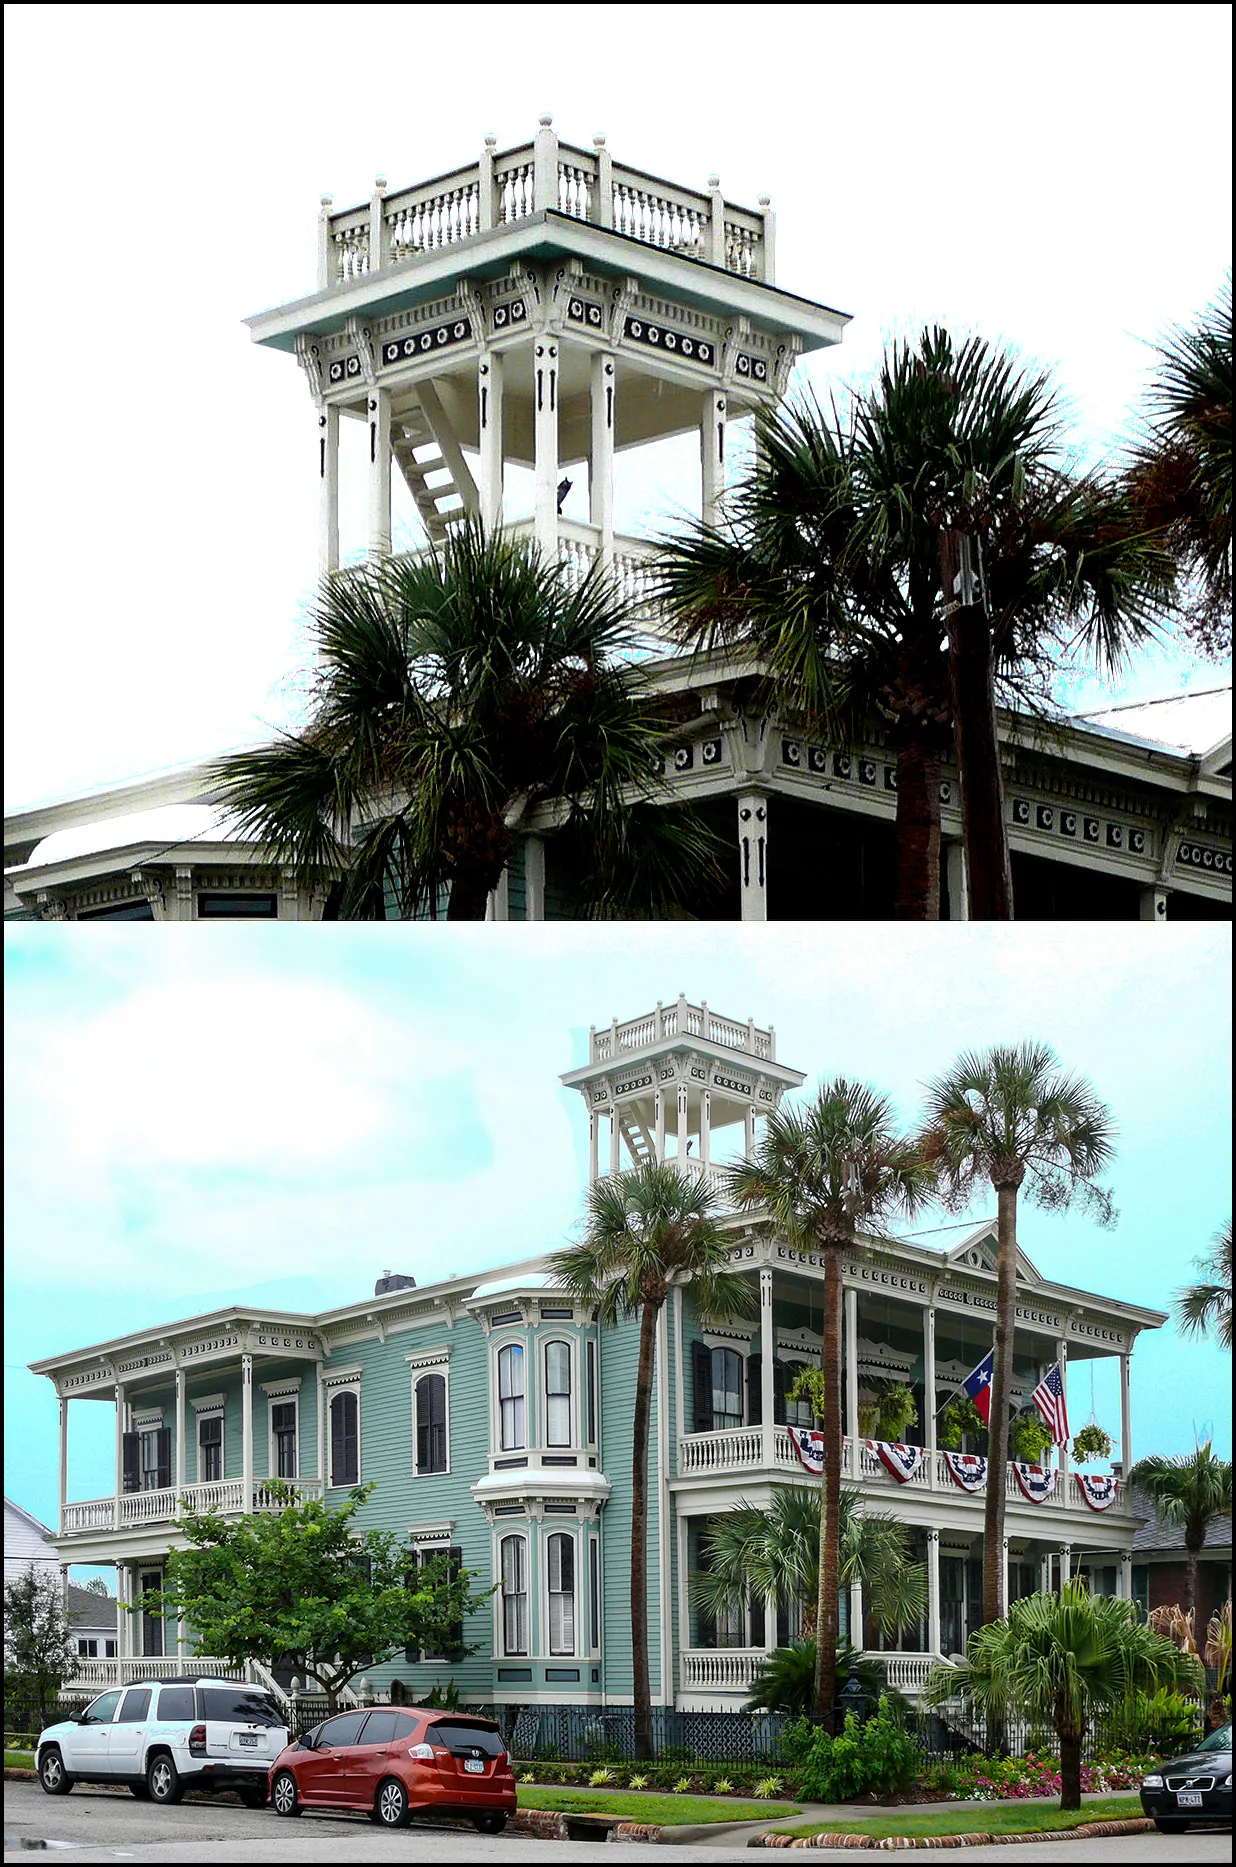 Photo showing: Belvedere on the Julius H. Ruhl Residence in Galveston.
Also, called a "Widows Walk" because they were used by wives to watch for husbands returning from sea voyages.  They are also known as a "widow's watch," roofwalk or Captain's Walk. The were a popular feature on coastal homes in the last half of the 19th century -- the Age of Sail